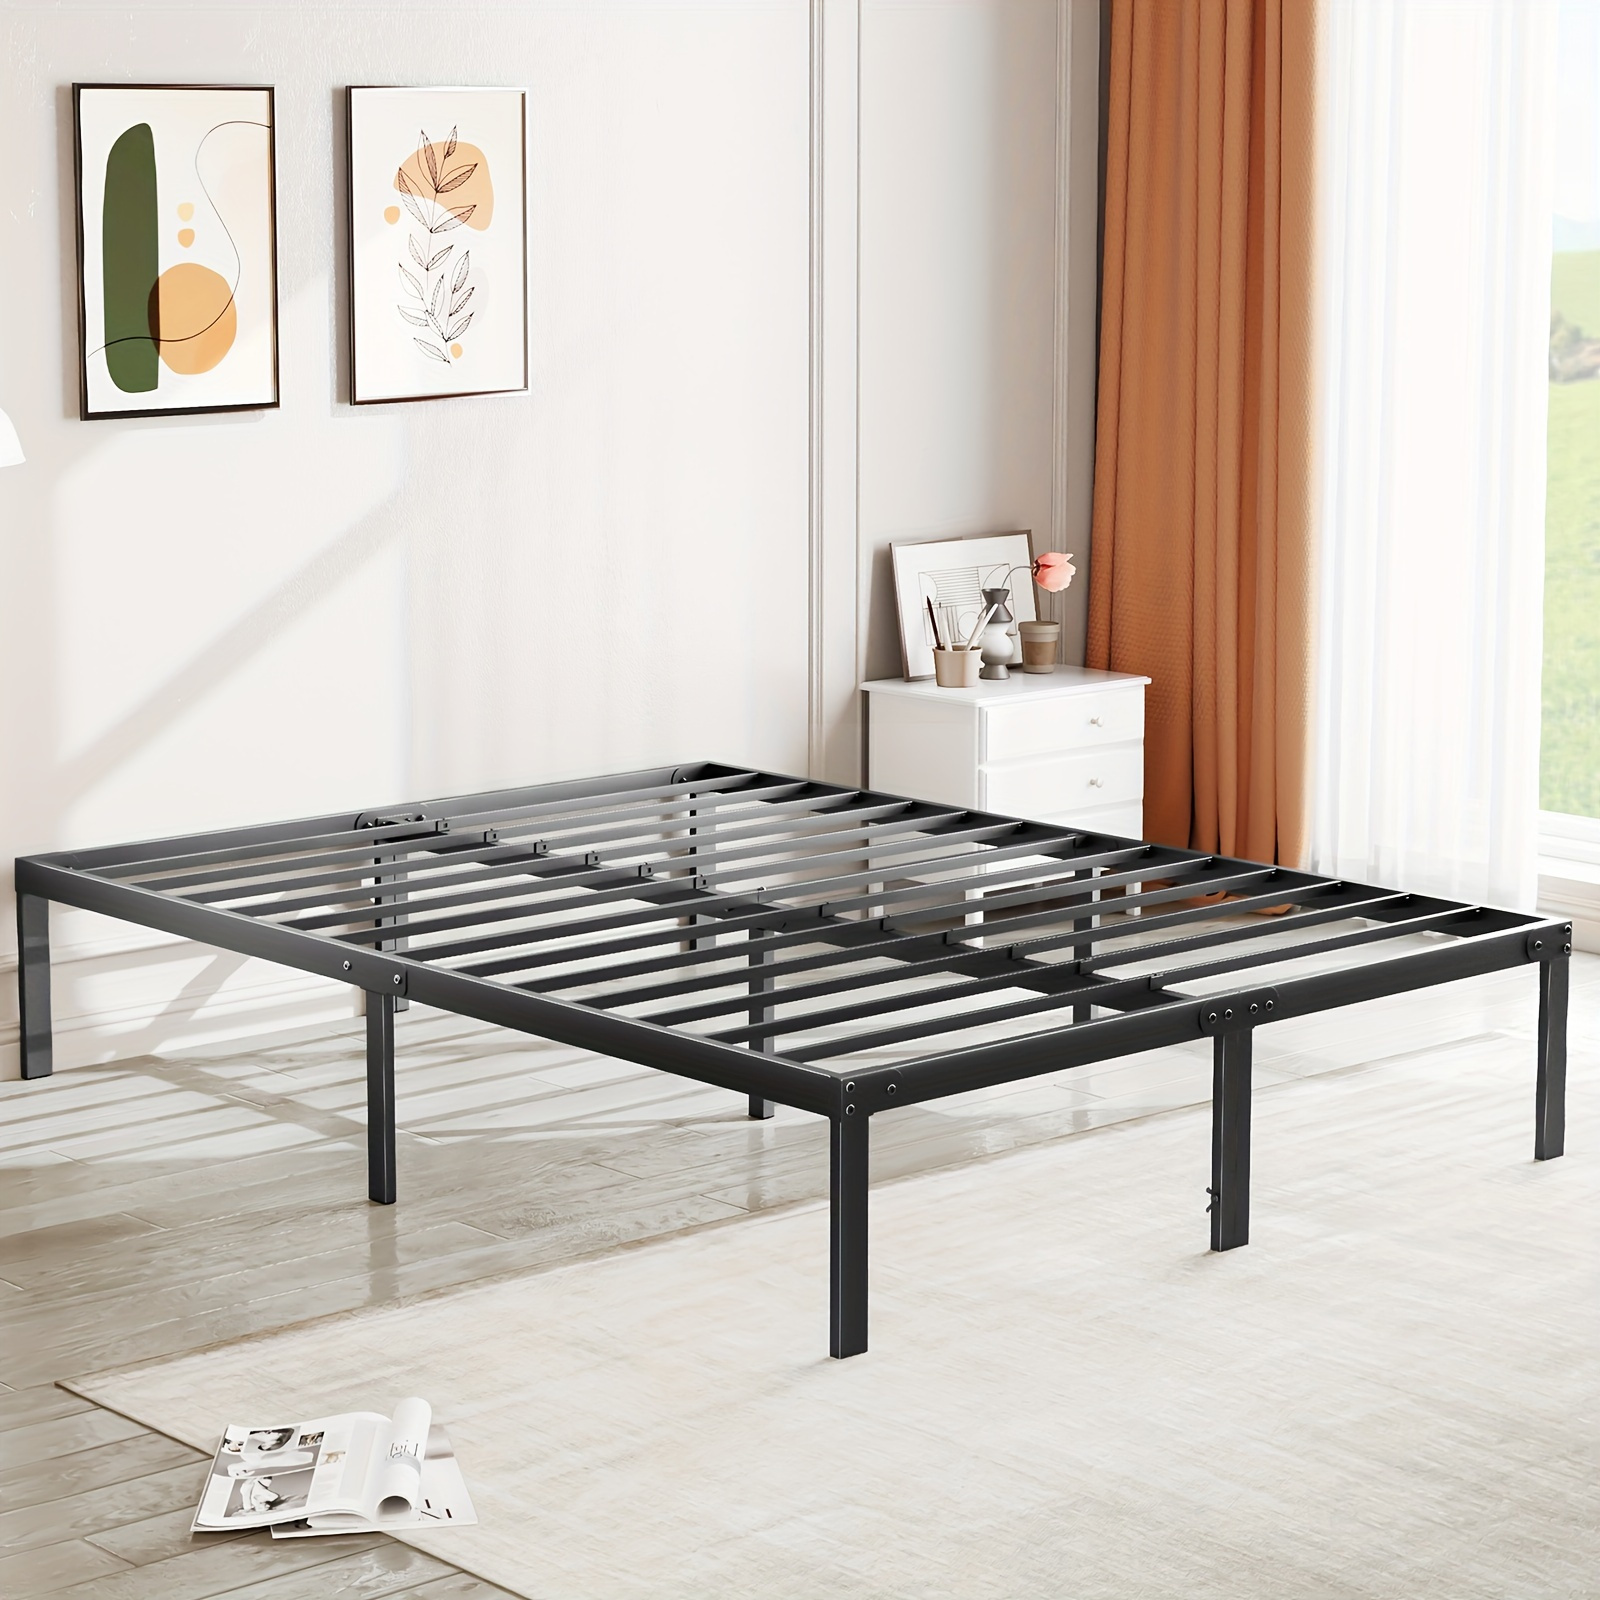 

Full Size Bed Frame, Metal Platform Frames No Box Spring Needed, Heavy Duty With Storage Space, 14 Inches High, Sturdy Steel Slat Support, Black